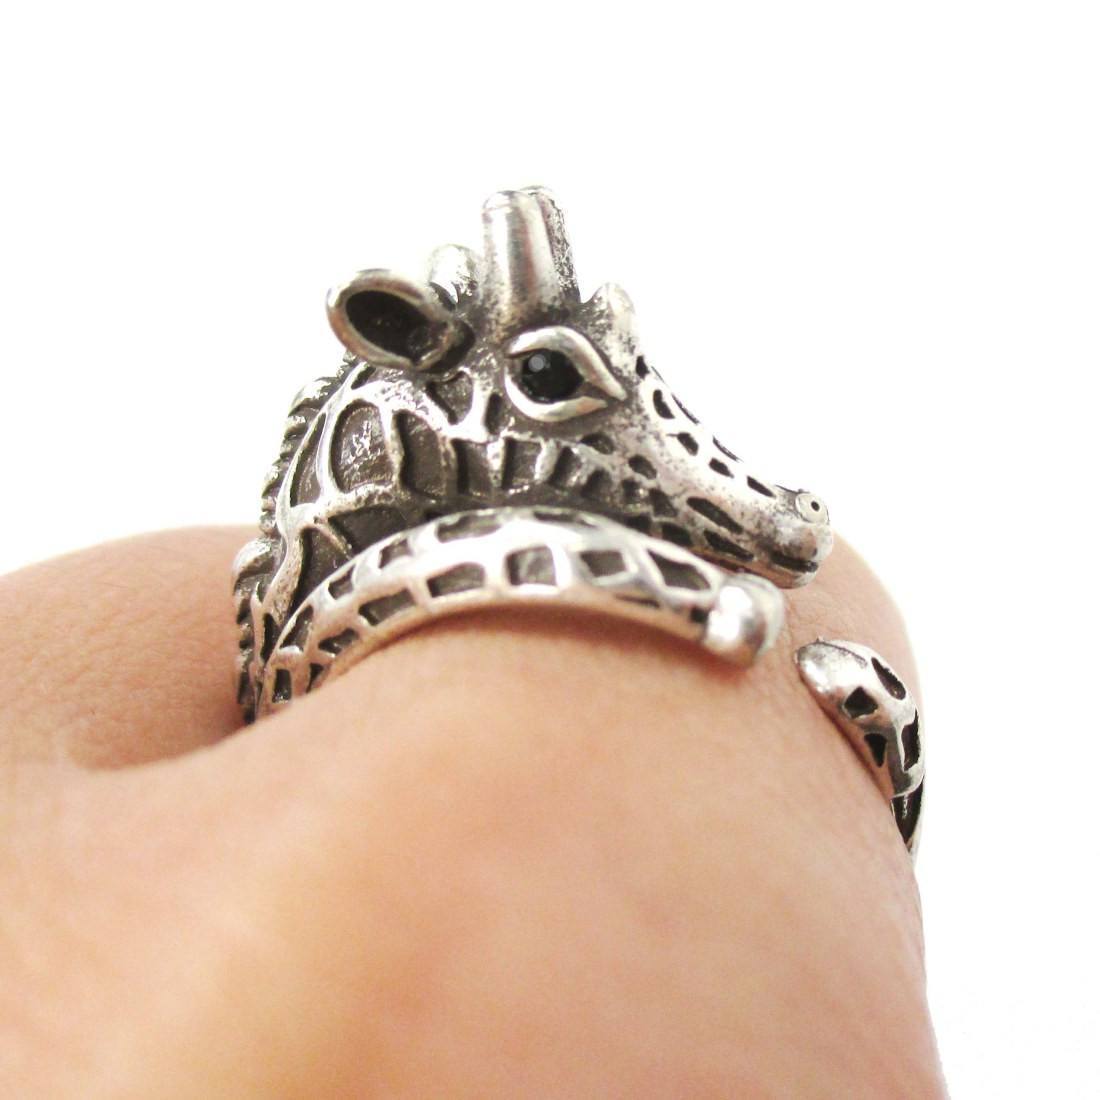 Detailed Giraffe Shaped Spotted Animal Wrap Ring in Silver | US Sizes 4 to 8.5